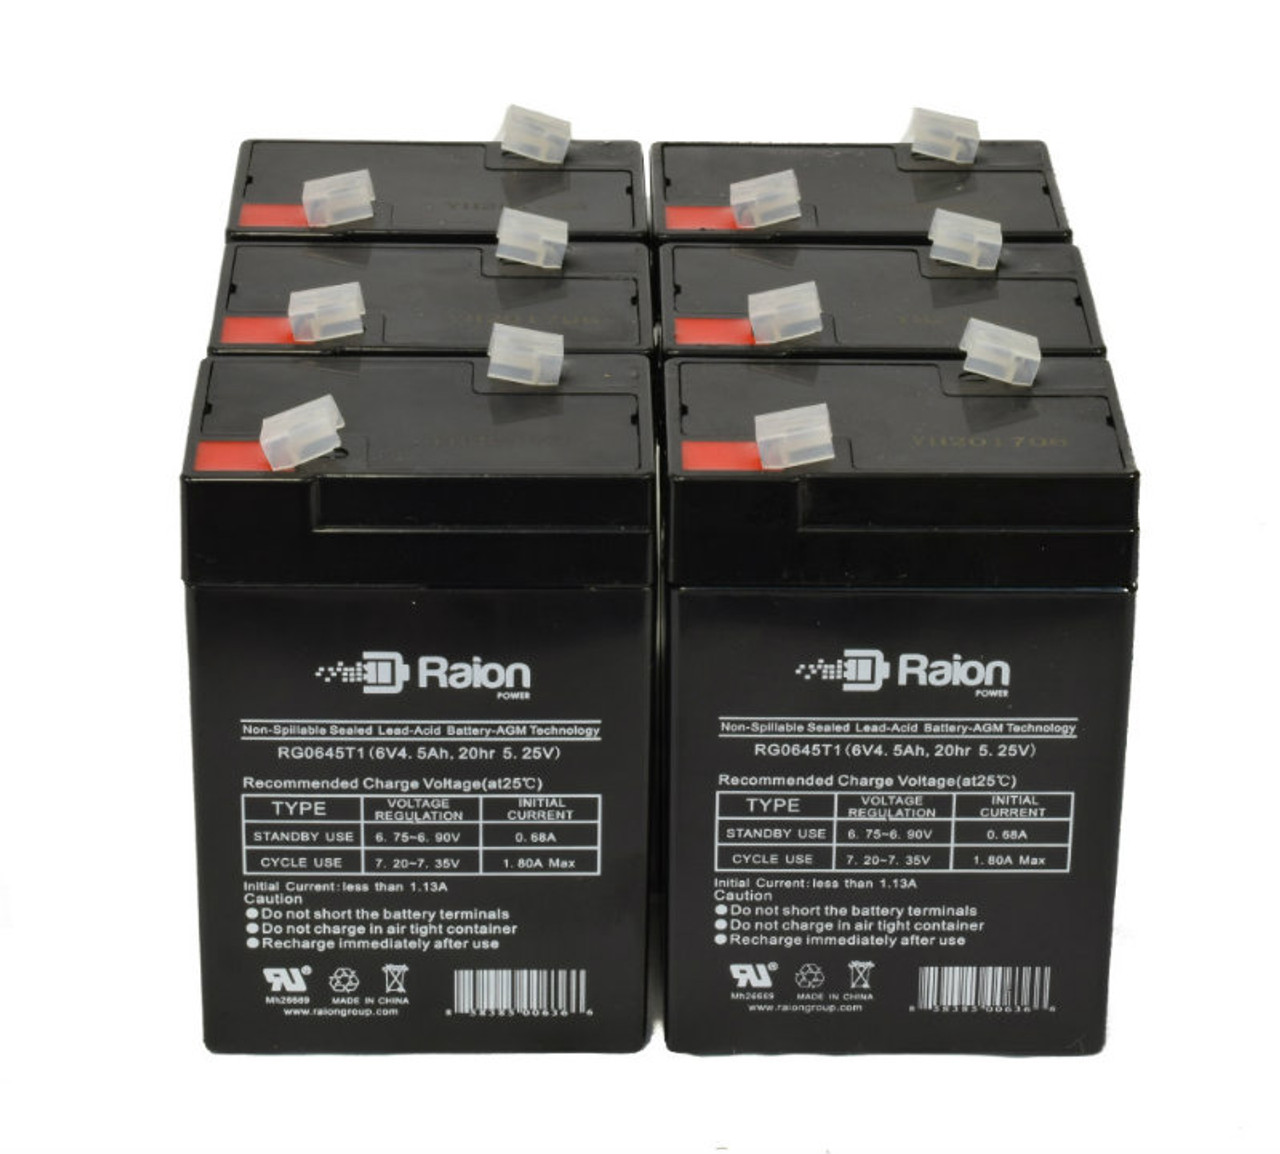 Raion Power 6V 4.5Ah Replacement Emergency Light Battery for Sure-Lites SLHC - 6 Pack